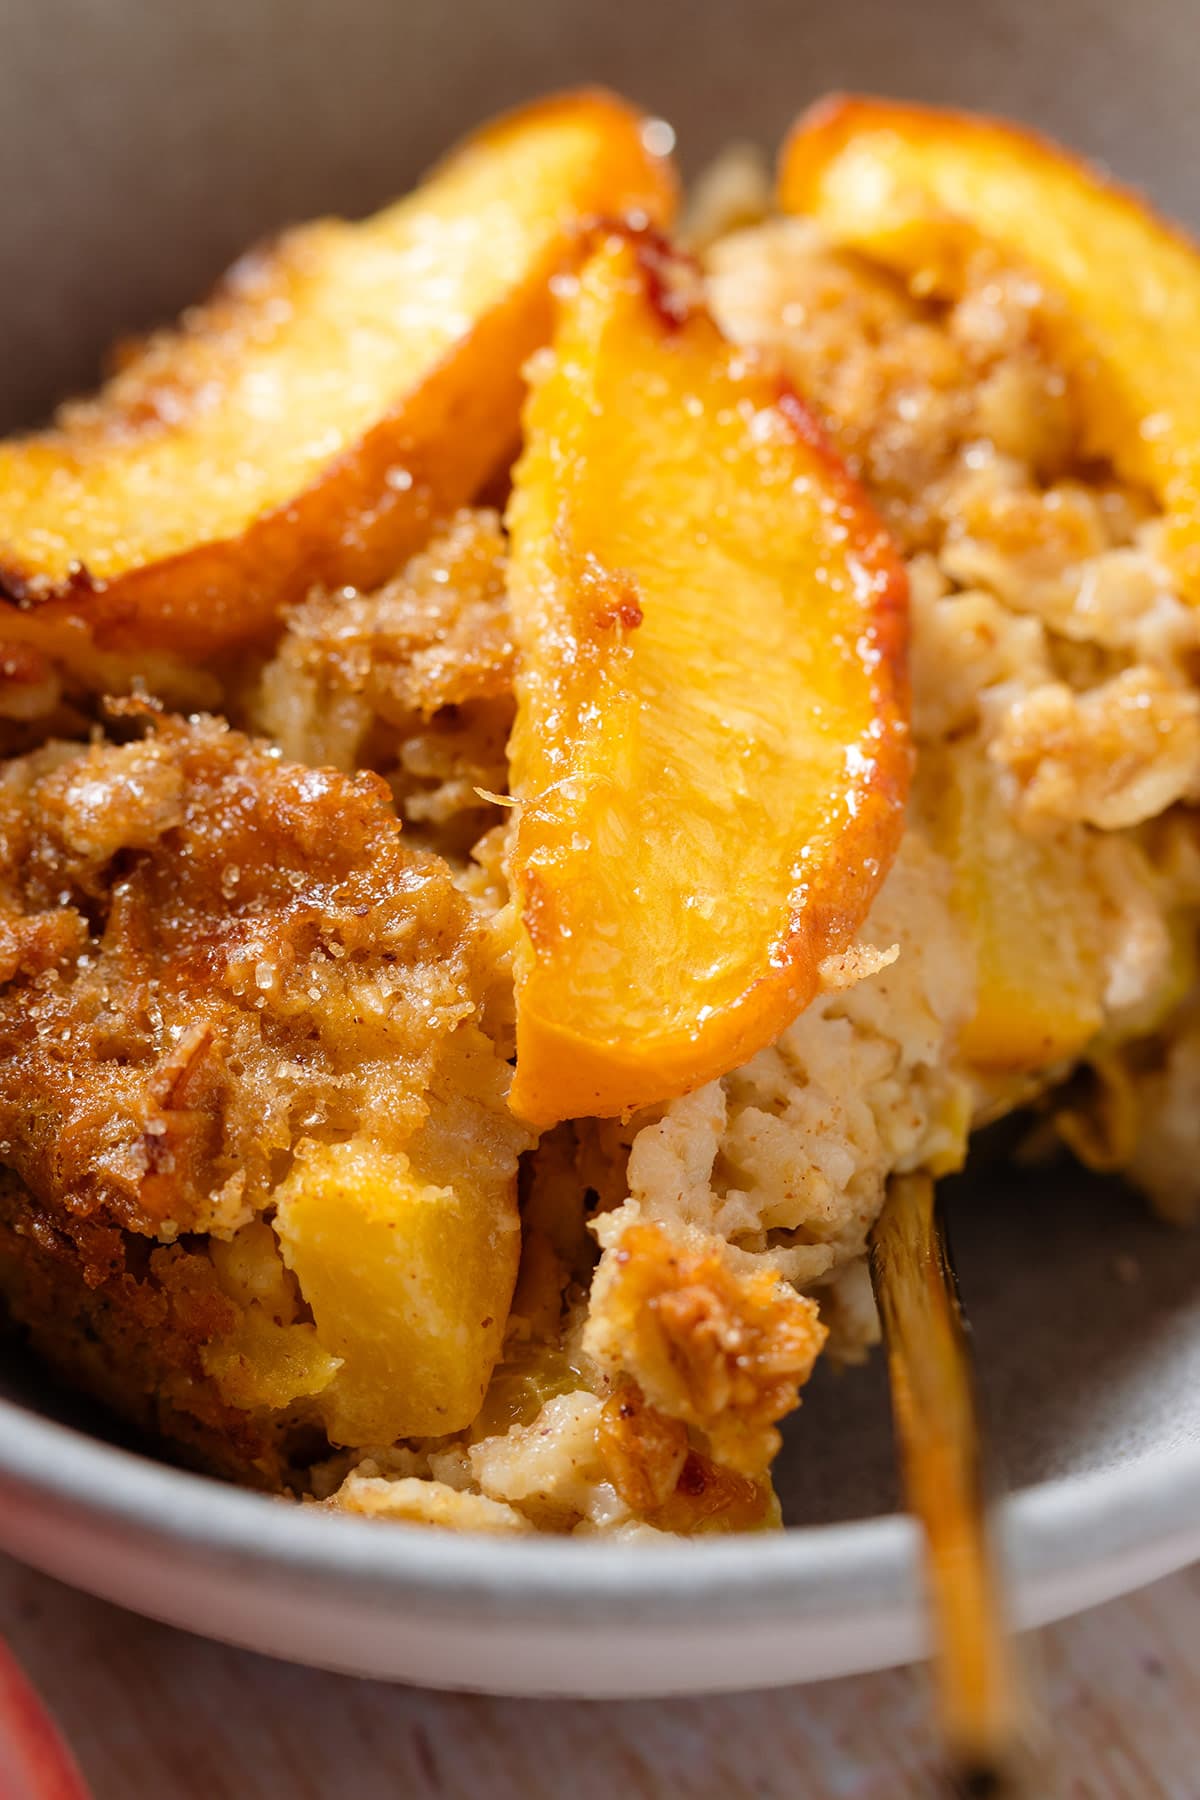 A close up of baked oatmeal with peaches in a grey bowl.